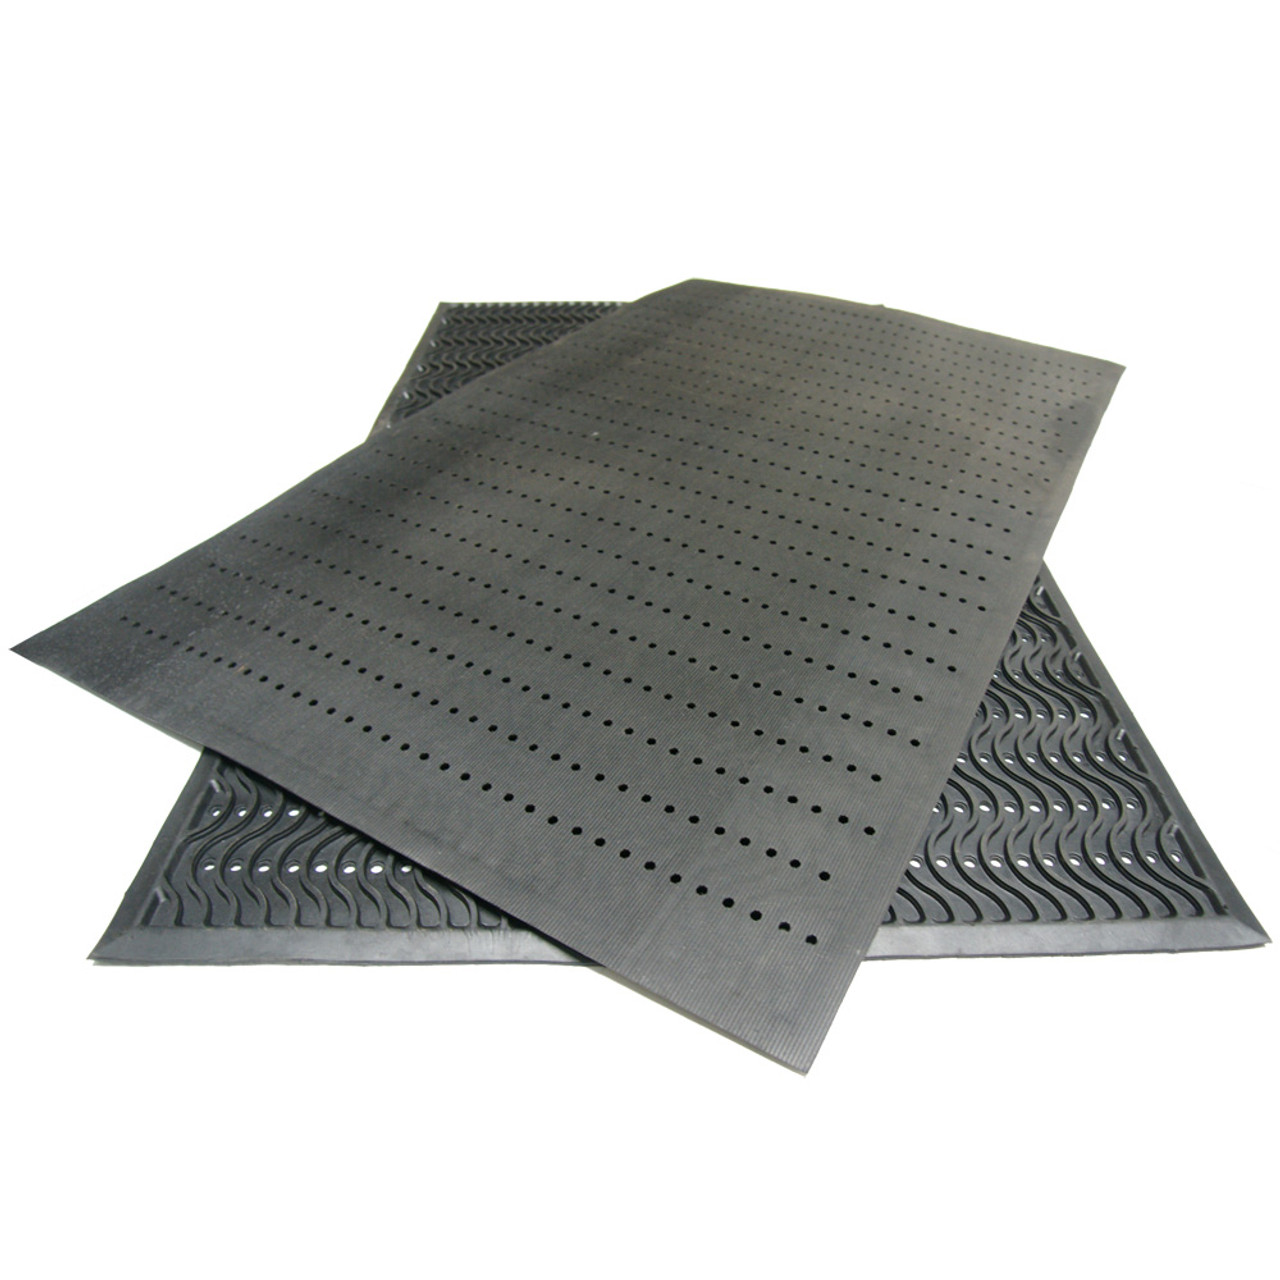 Heavy Duty Floor Mats for Commercial Use - Top Products